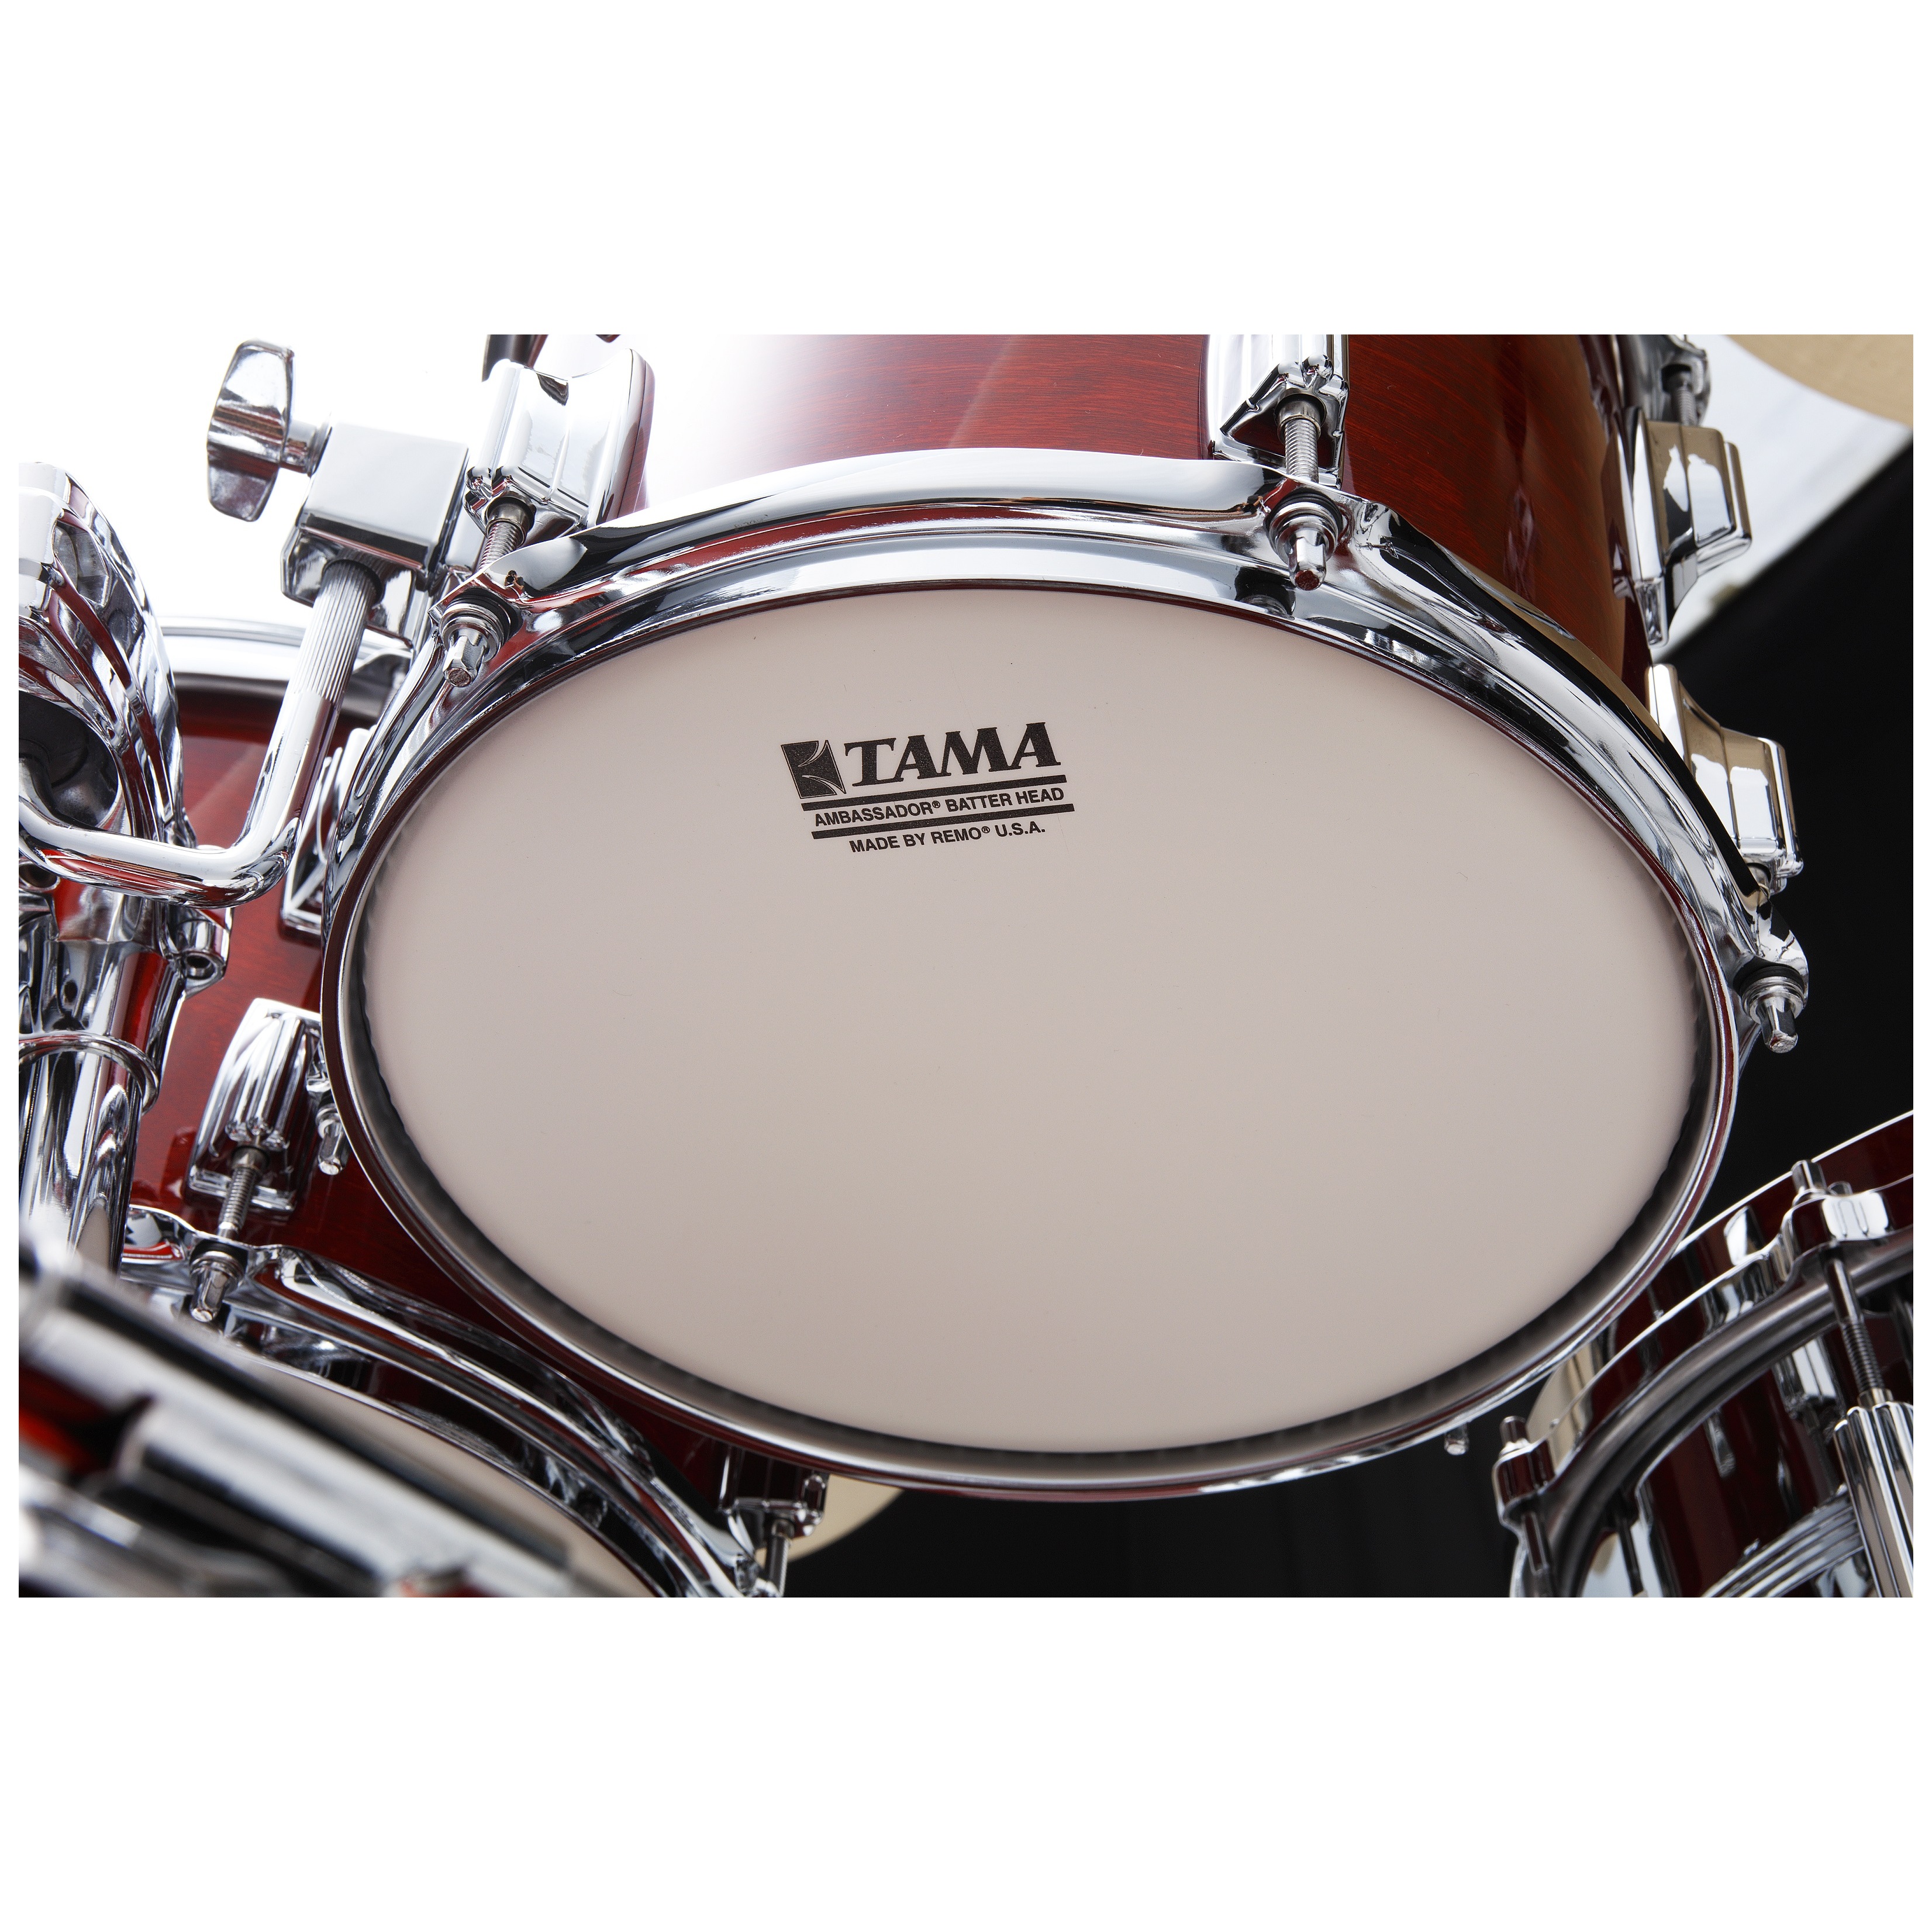 Tama SU42RS-CHW - 50th LIMITED Superstar Reissue 4pcs Drum Shell Kit - Cherry Wine 2